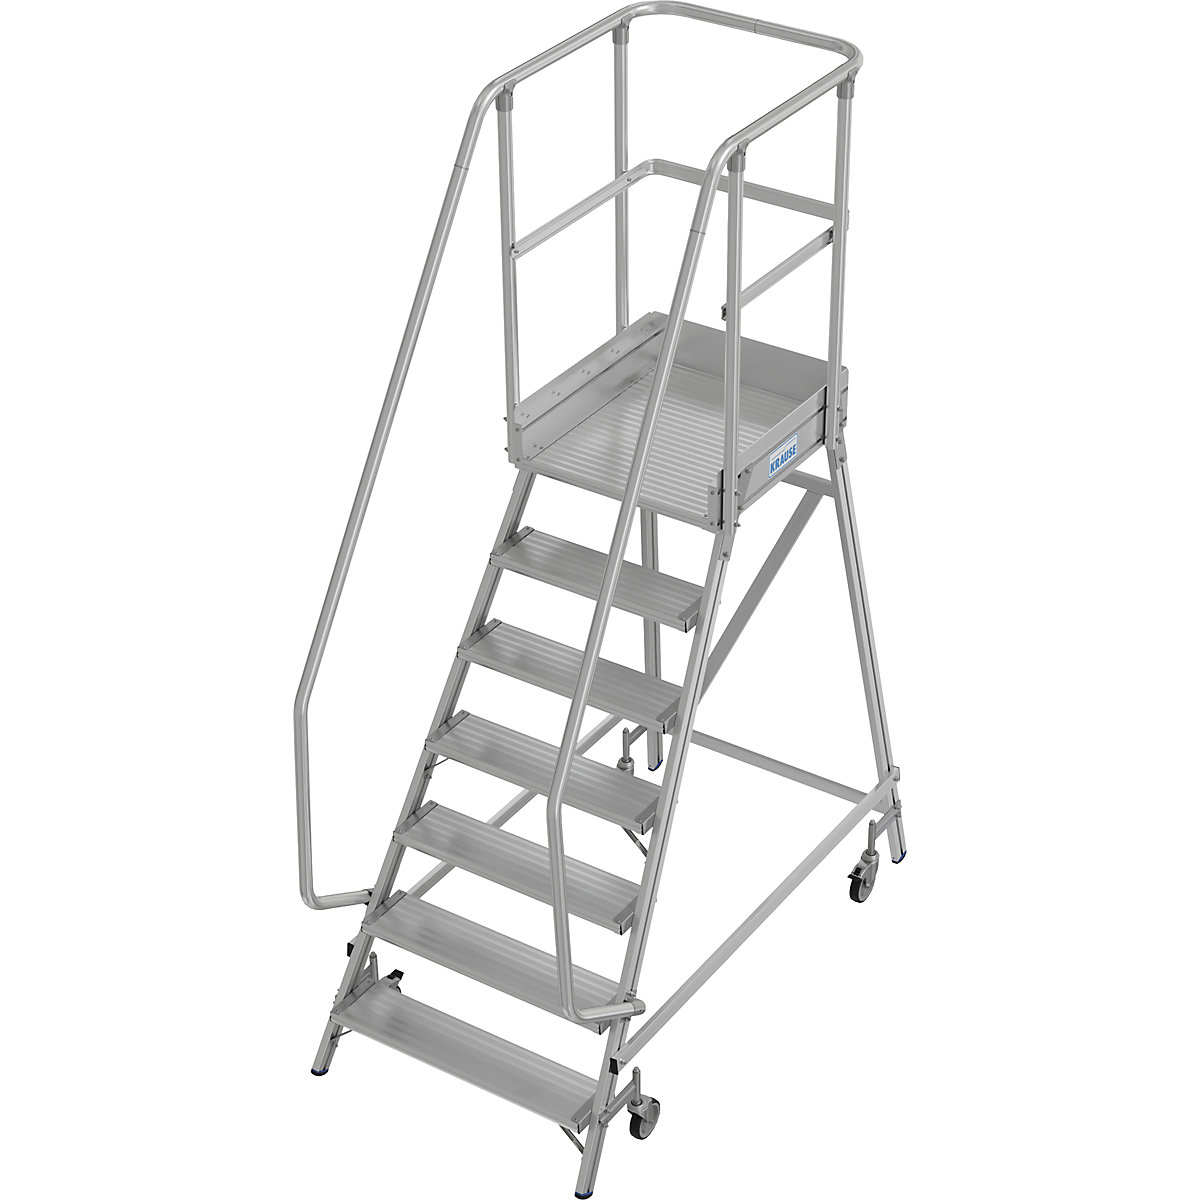 Mobile safety steps – KRAUSE, single sided access, foot rail, 7 steps-13